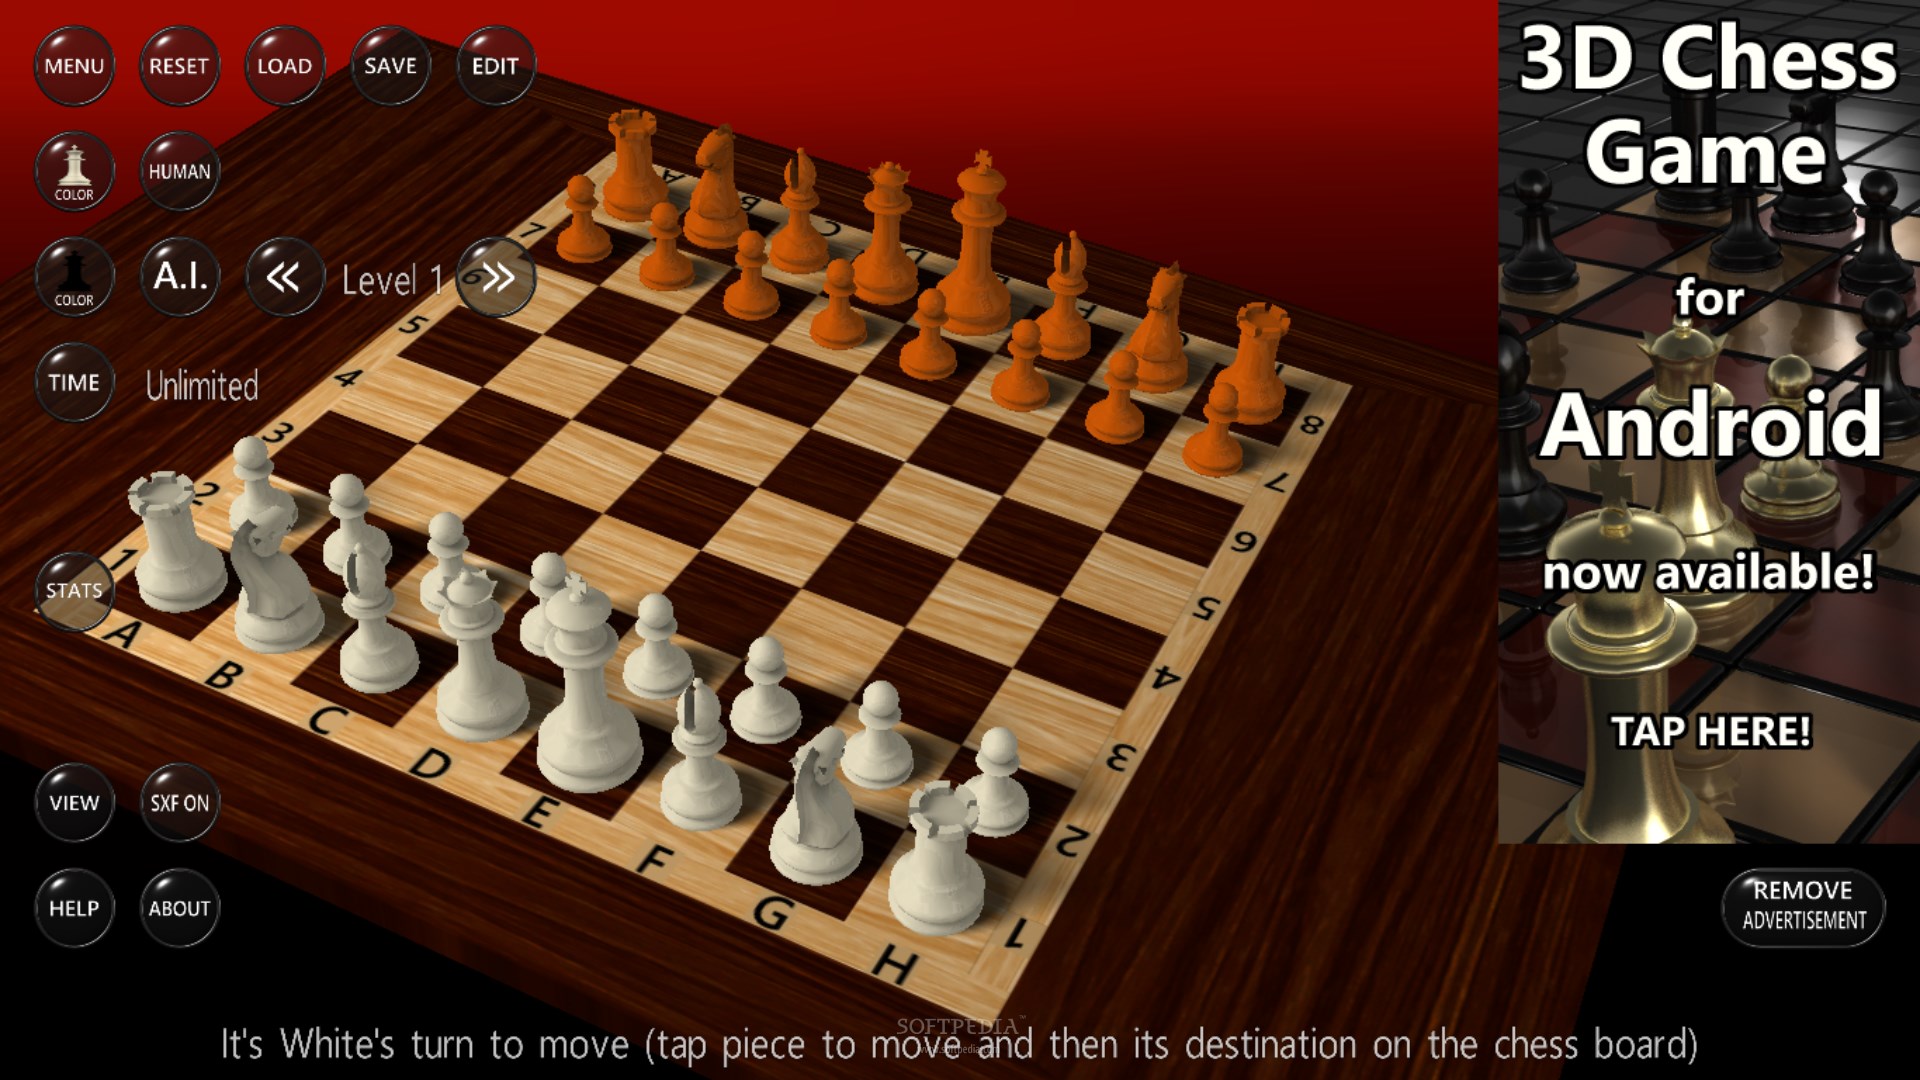 3D Chess Game for Windows 8 Download